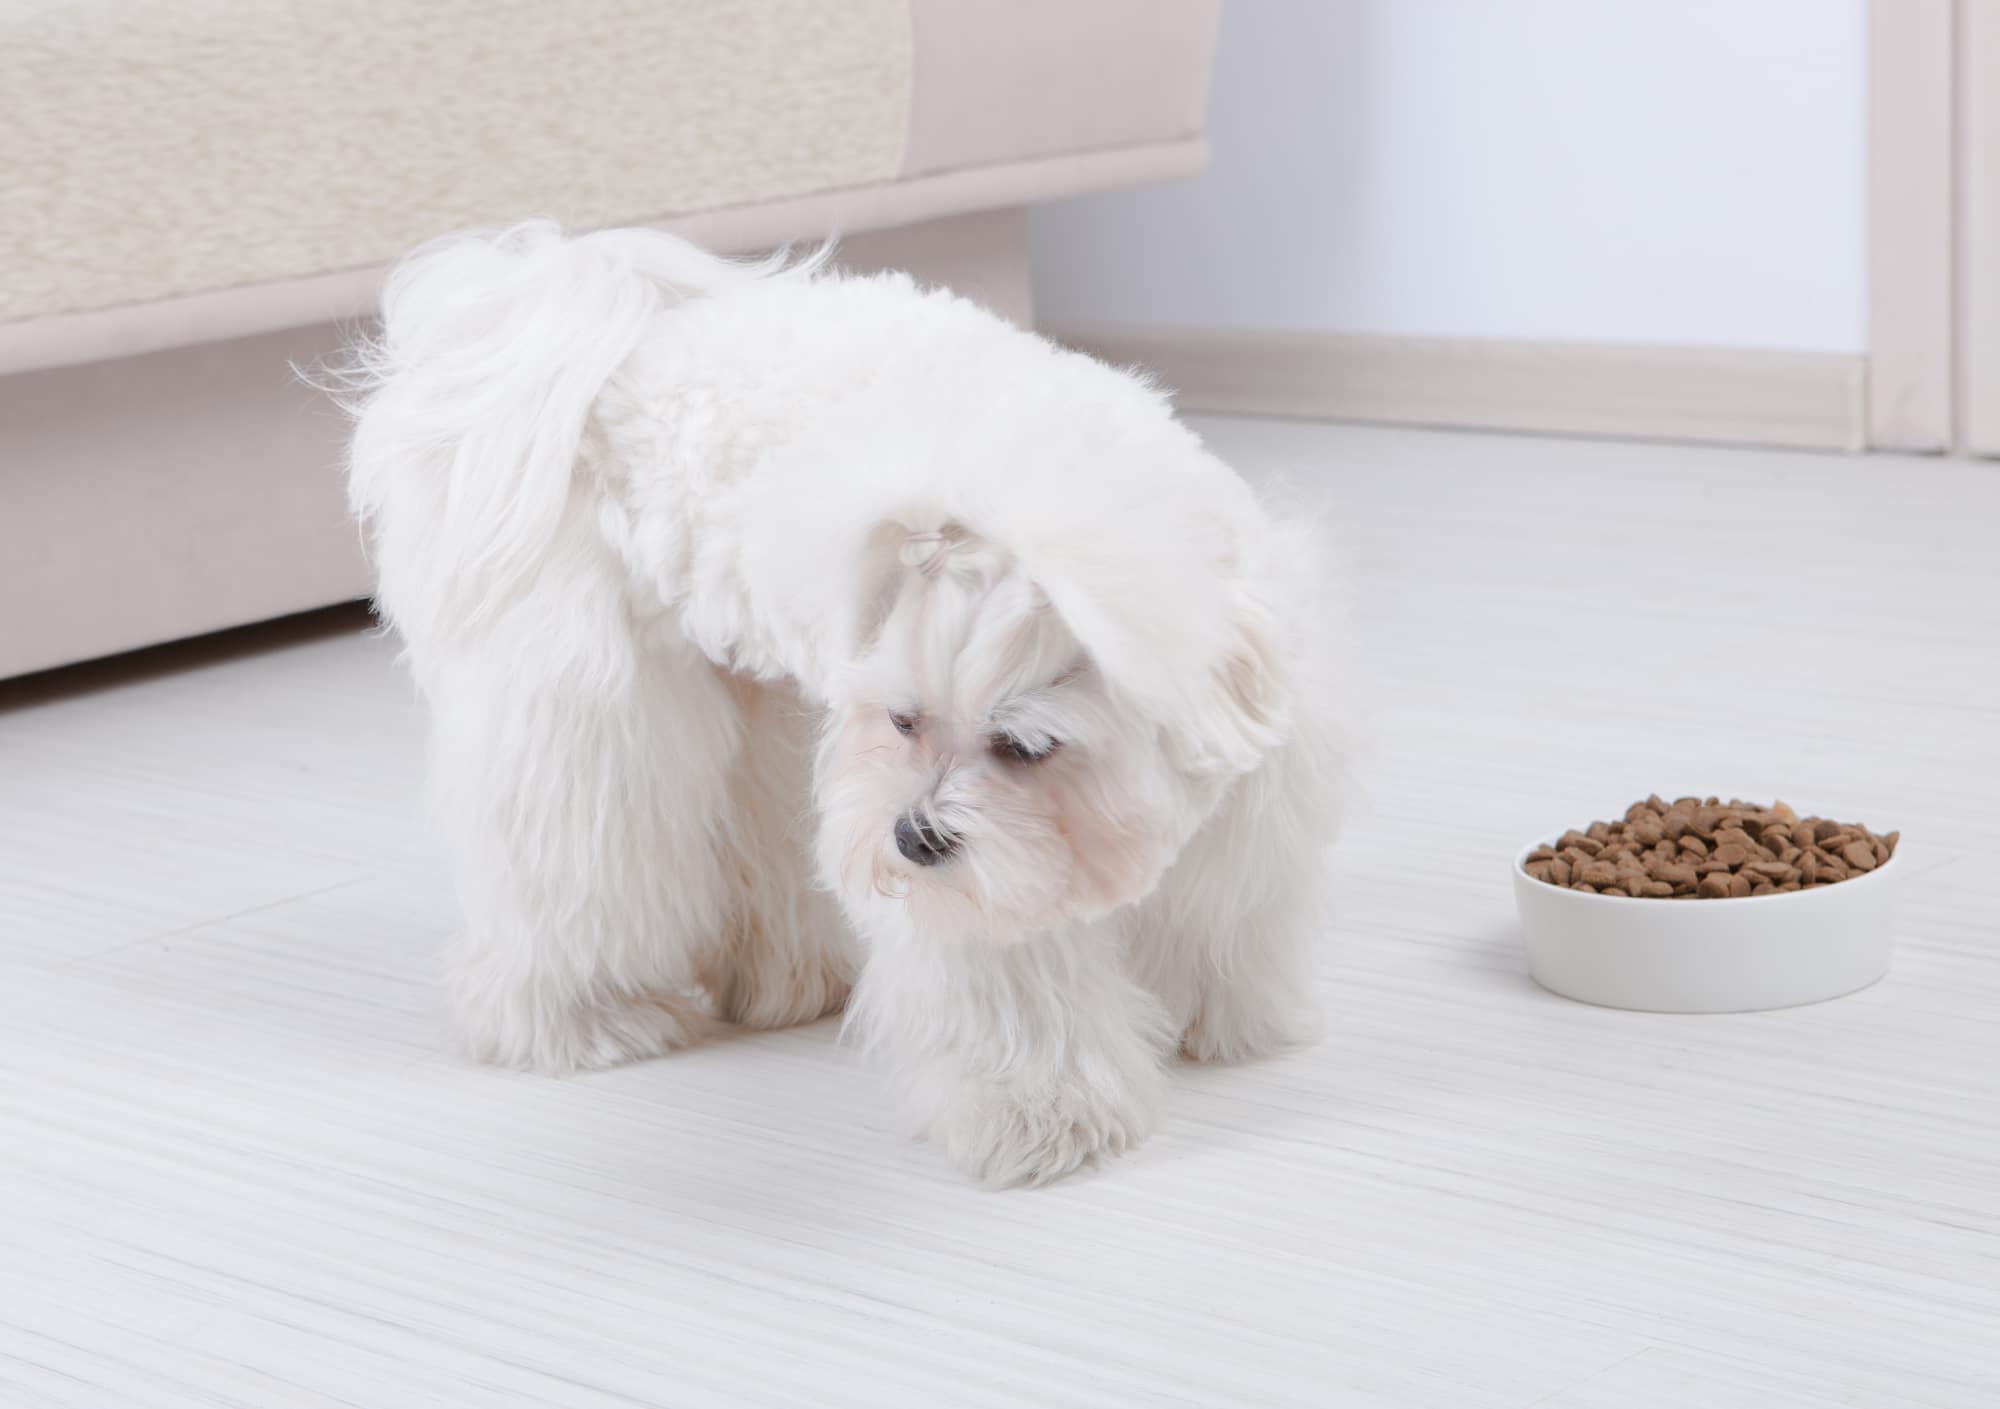 What To Do When Your Dog Won’t Eat Dog Food But Will Eat Human Food - Little Dog Tips